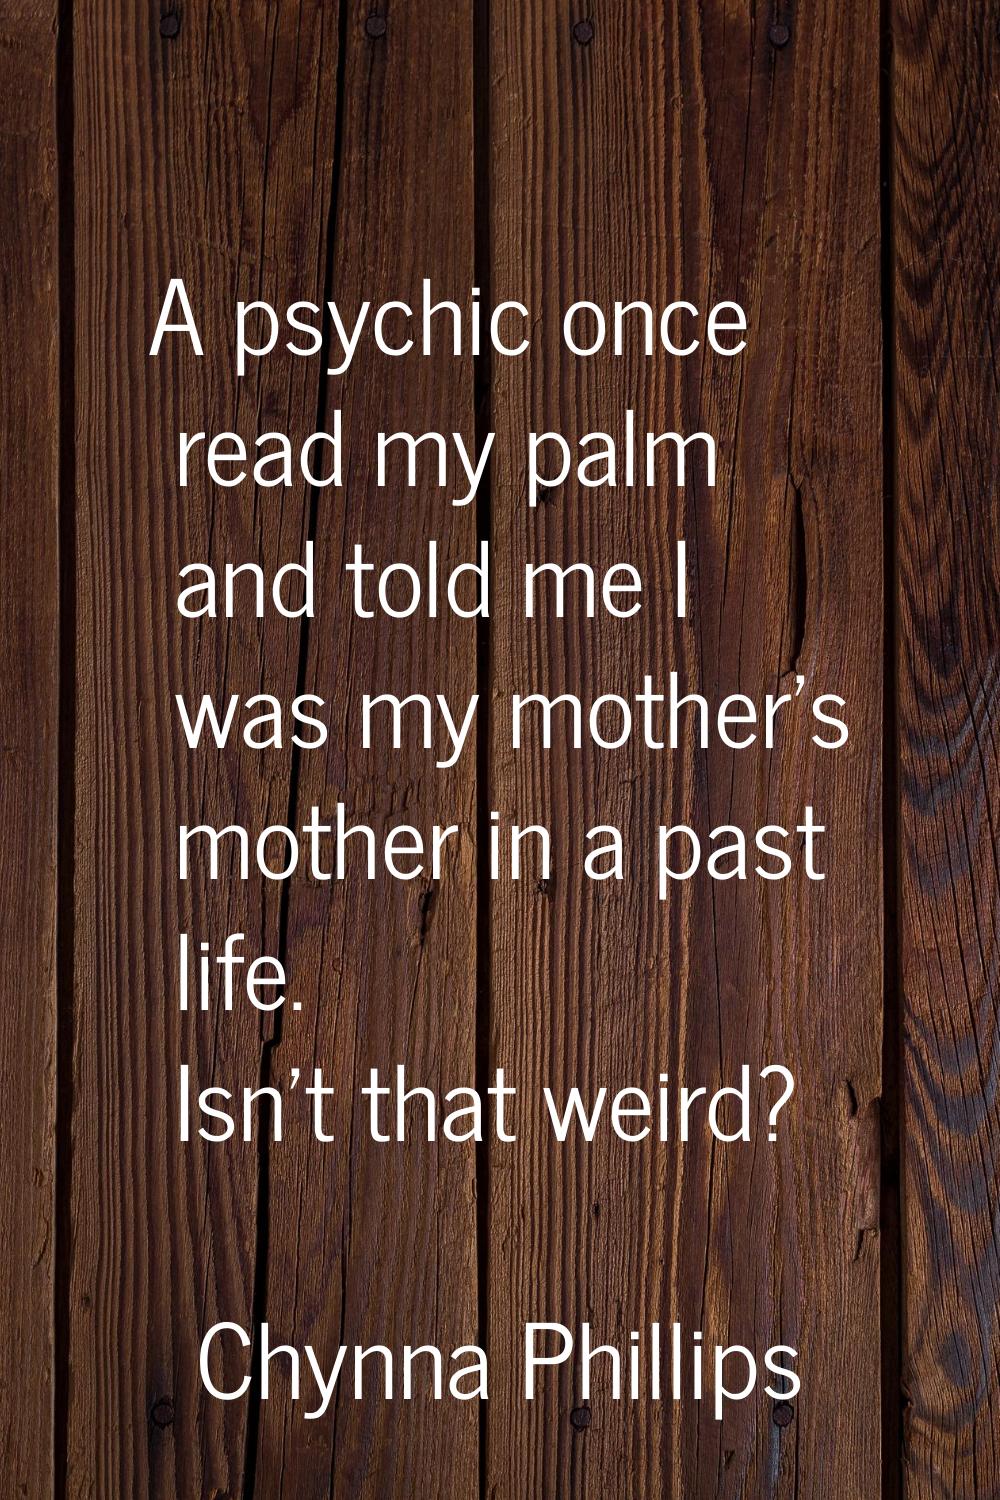 A psychic once read my palm and told me I was my mother's mother in a past life. Isn't that weird?